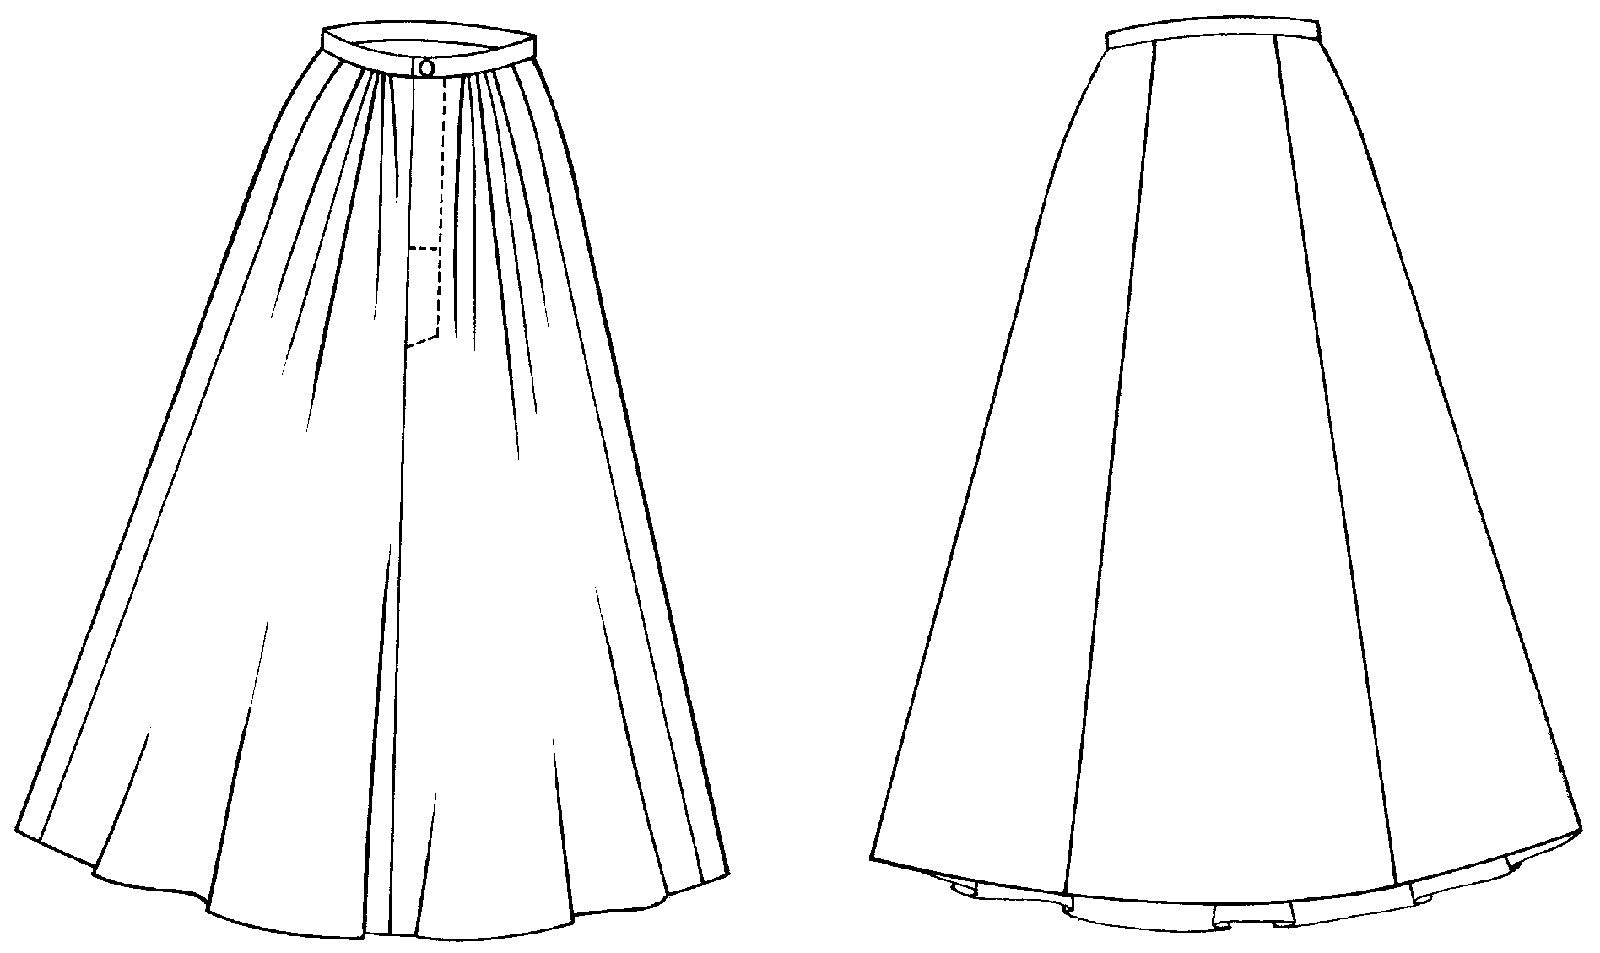 Black and white flat-line pattern drawings of front and back view of 209 Walking Skirt.